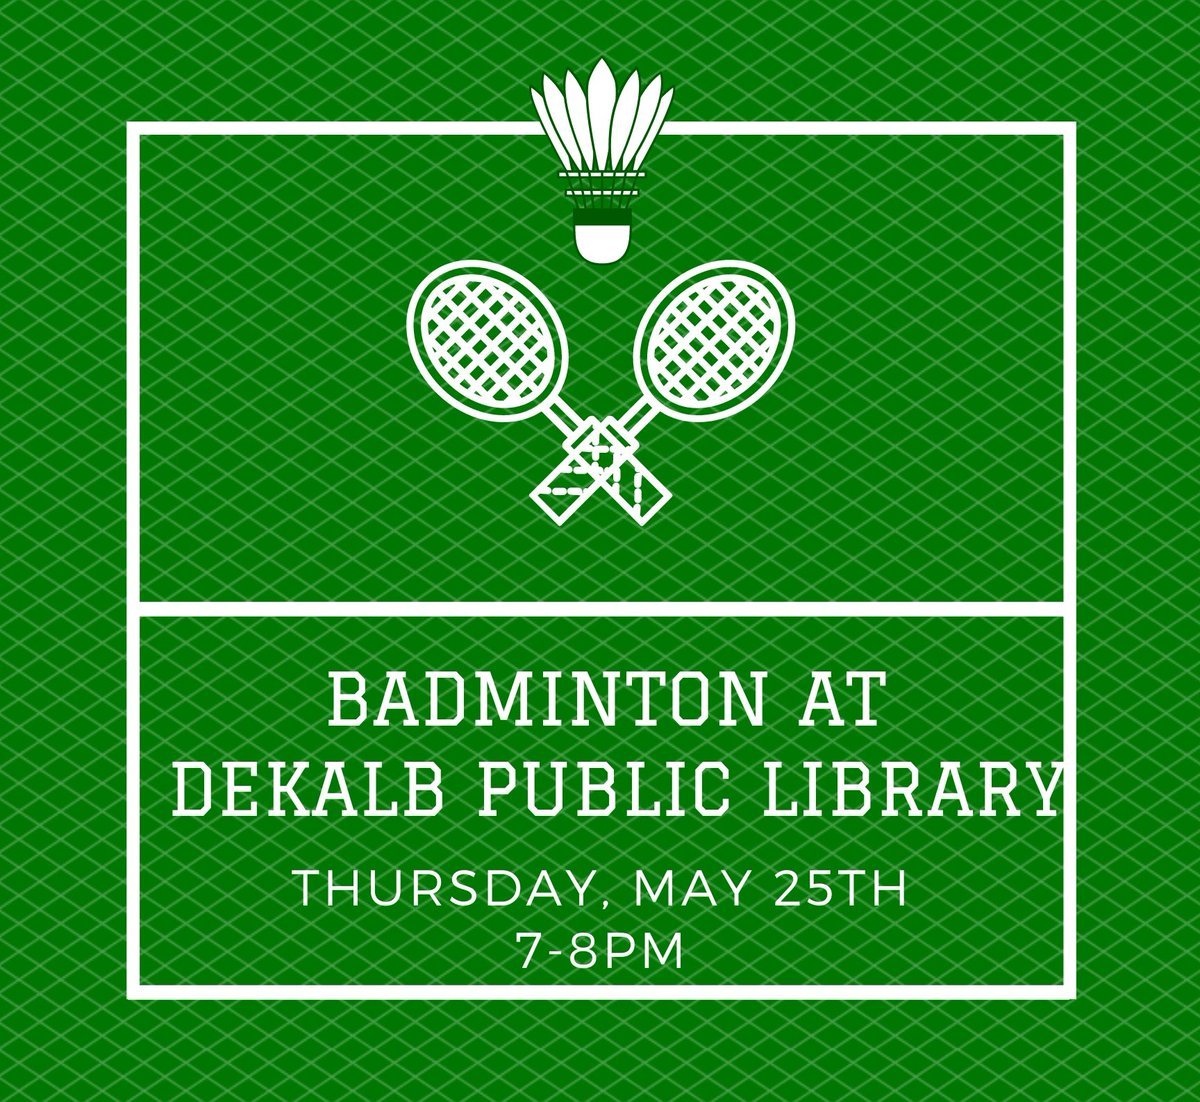 Join us in the lower level of the DeKalb Public Library tonight for Badminton at the Library! The event runs from 7-8pm.